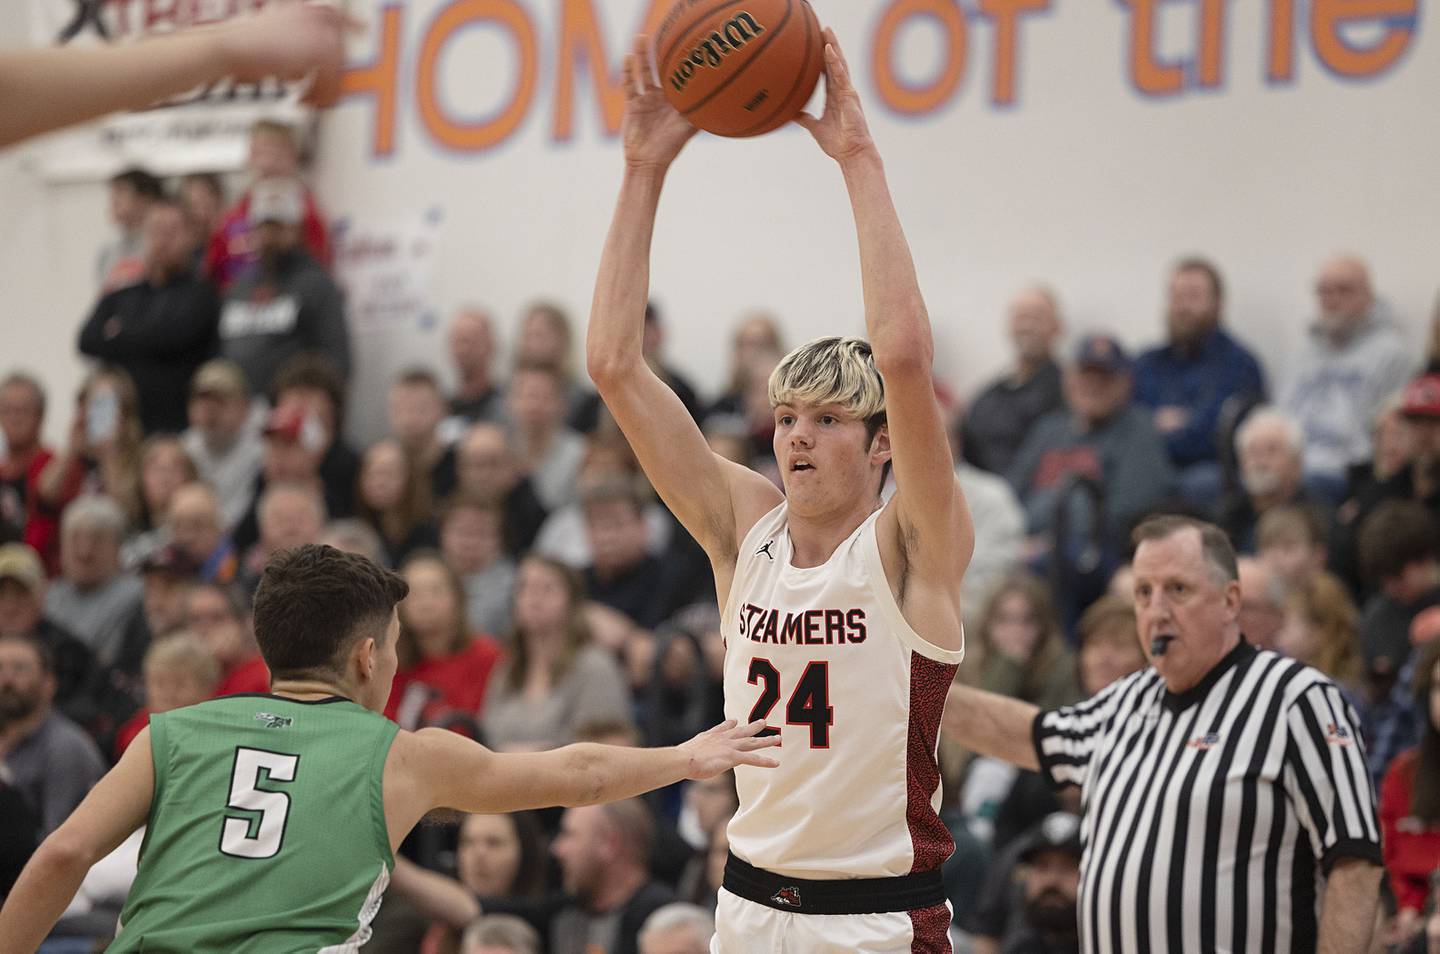 Fulton’s Daken Pessman makes a pass against Scales Mound’s Charlie Wiegel Friday, March 3, 2023 in the 1A sectional final in Lanark.